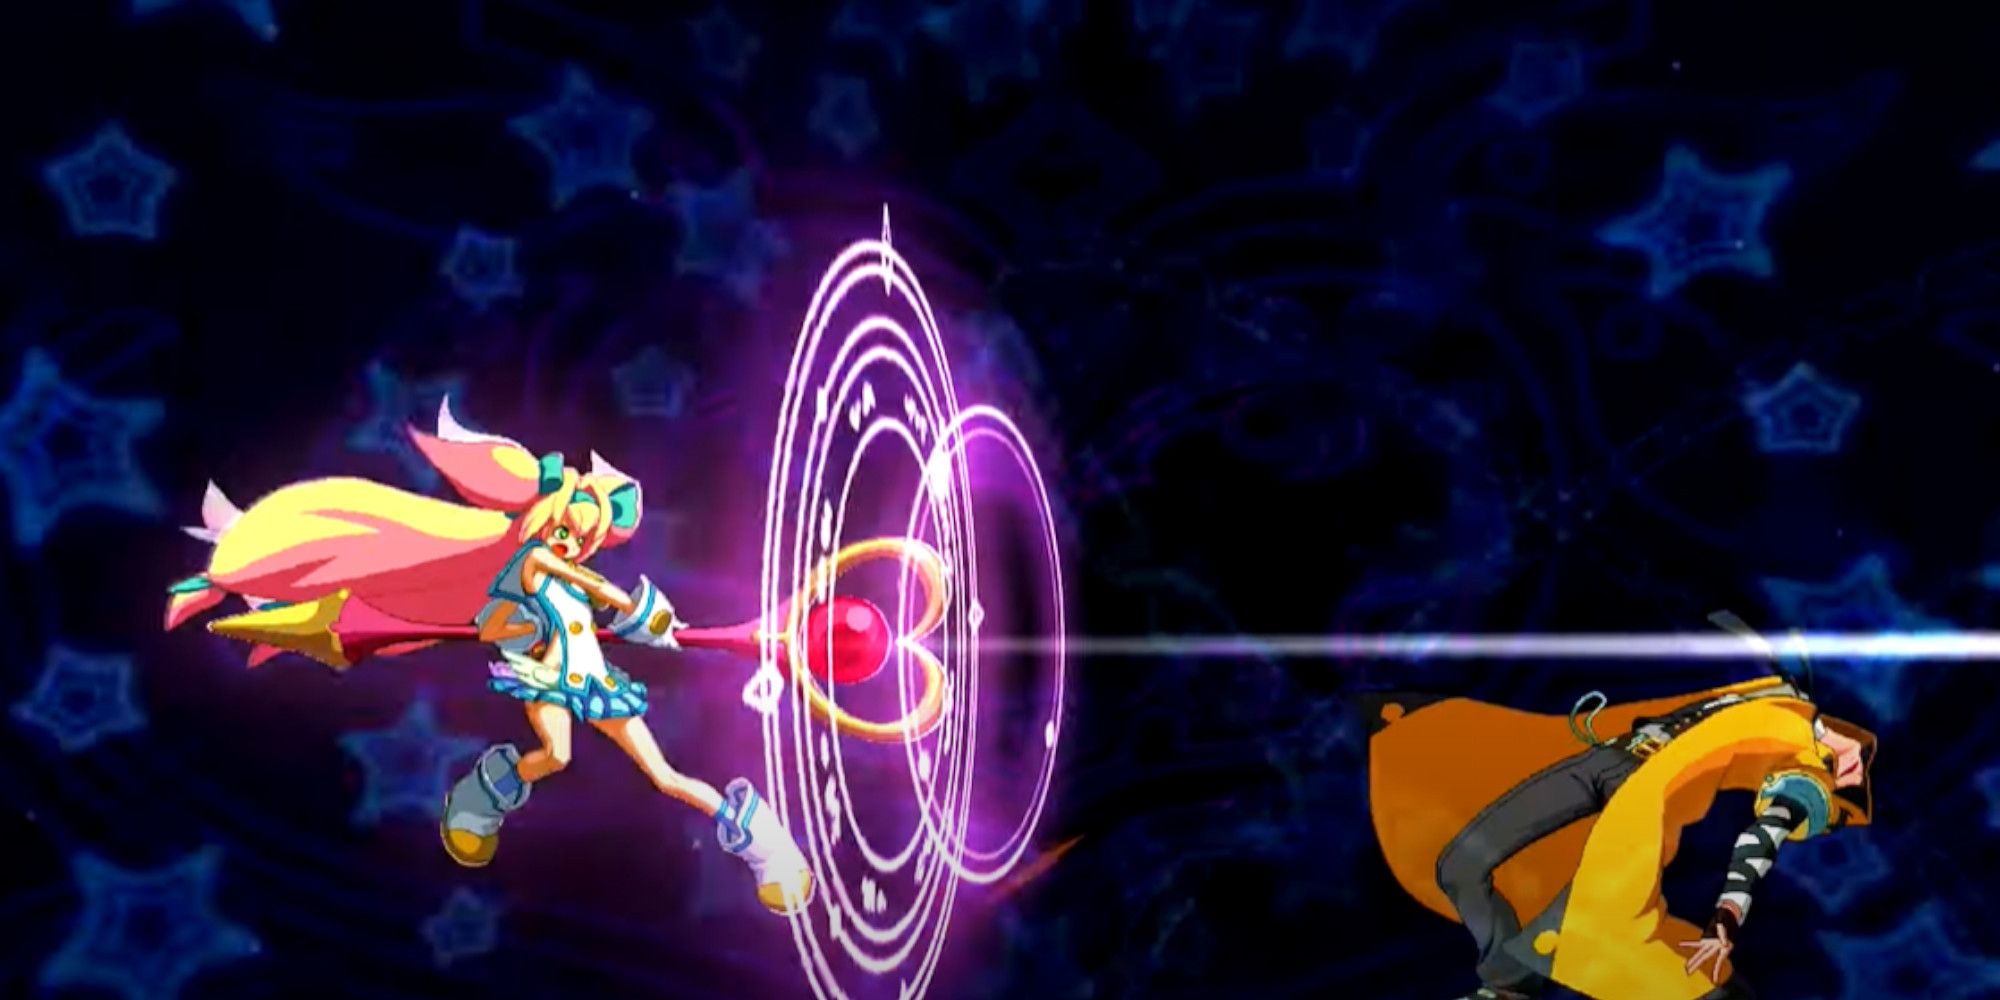 Platinum using her astral finish on Terumi in Blazblue Centralfiction